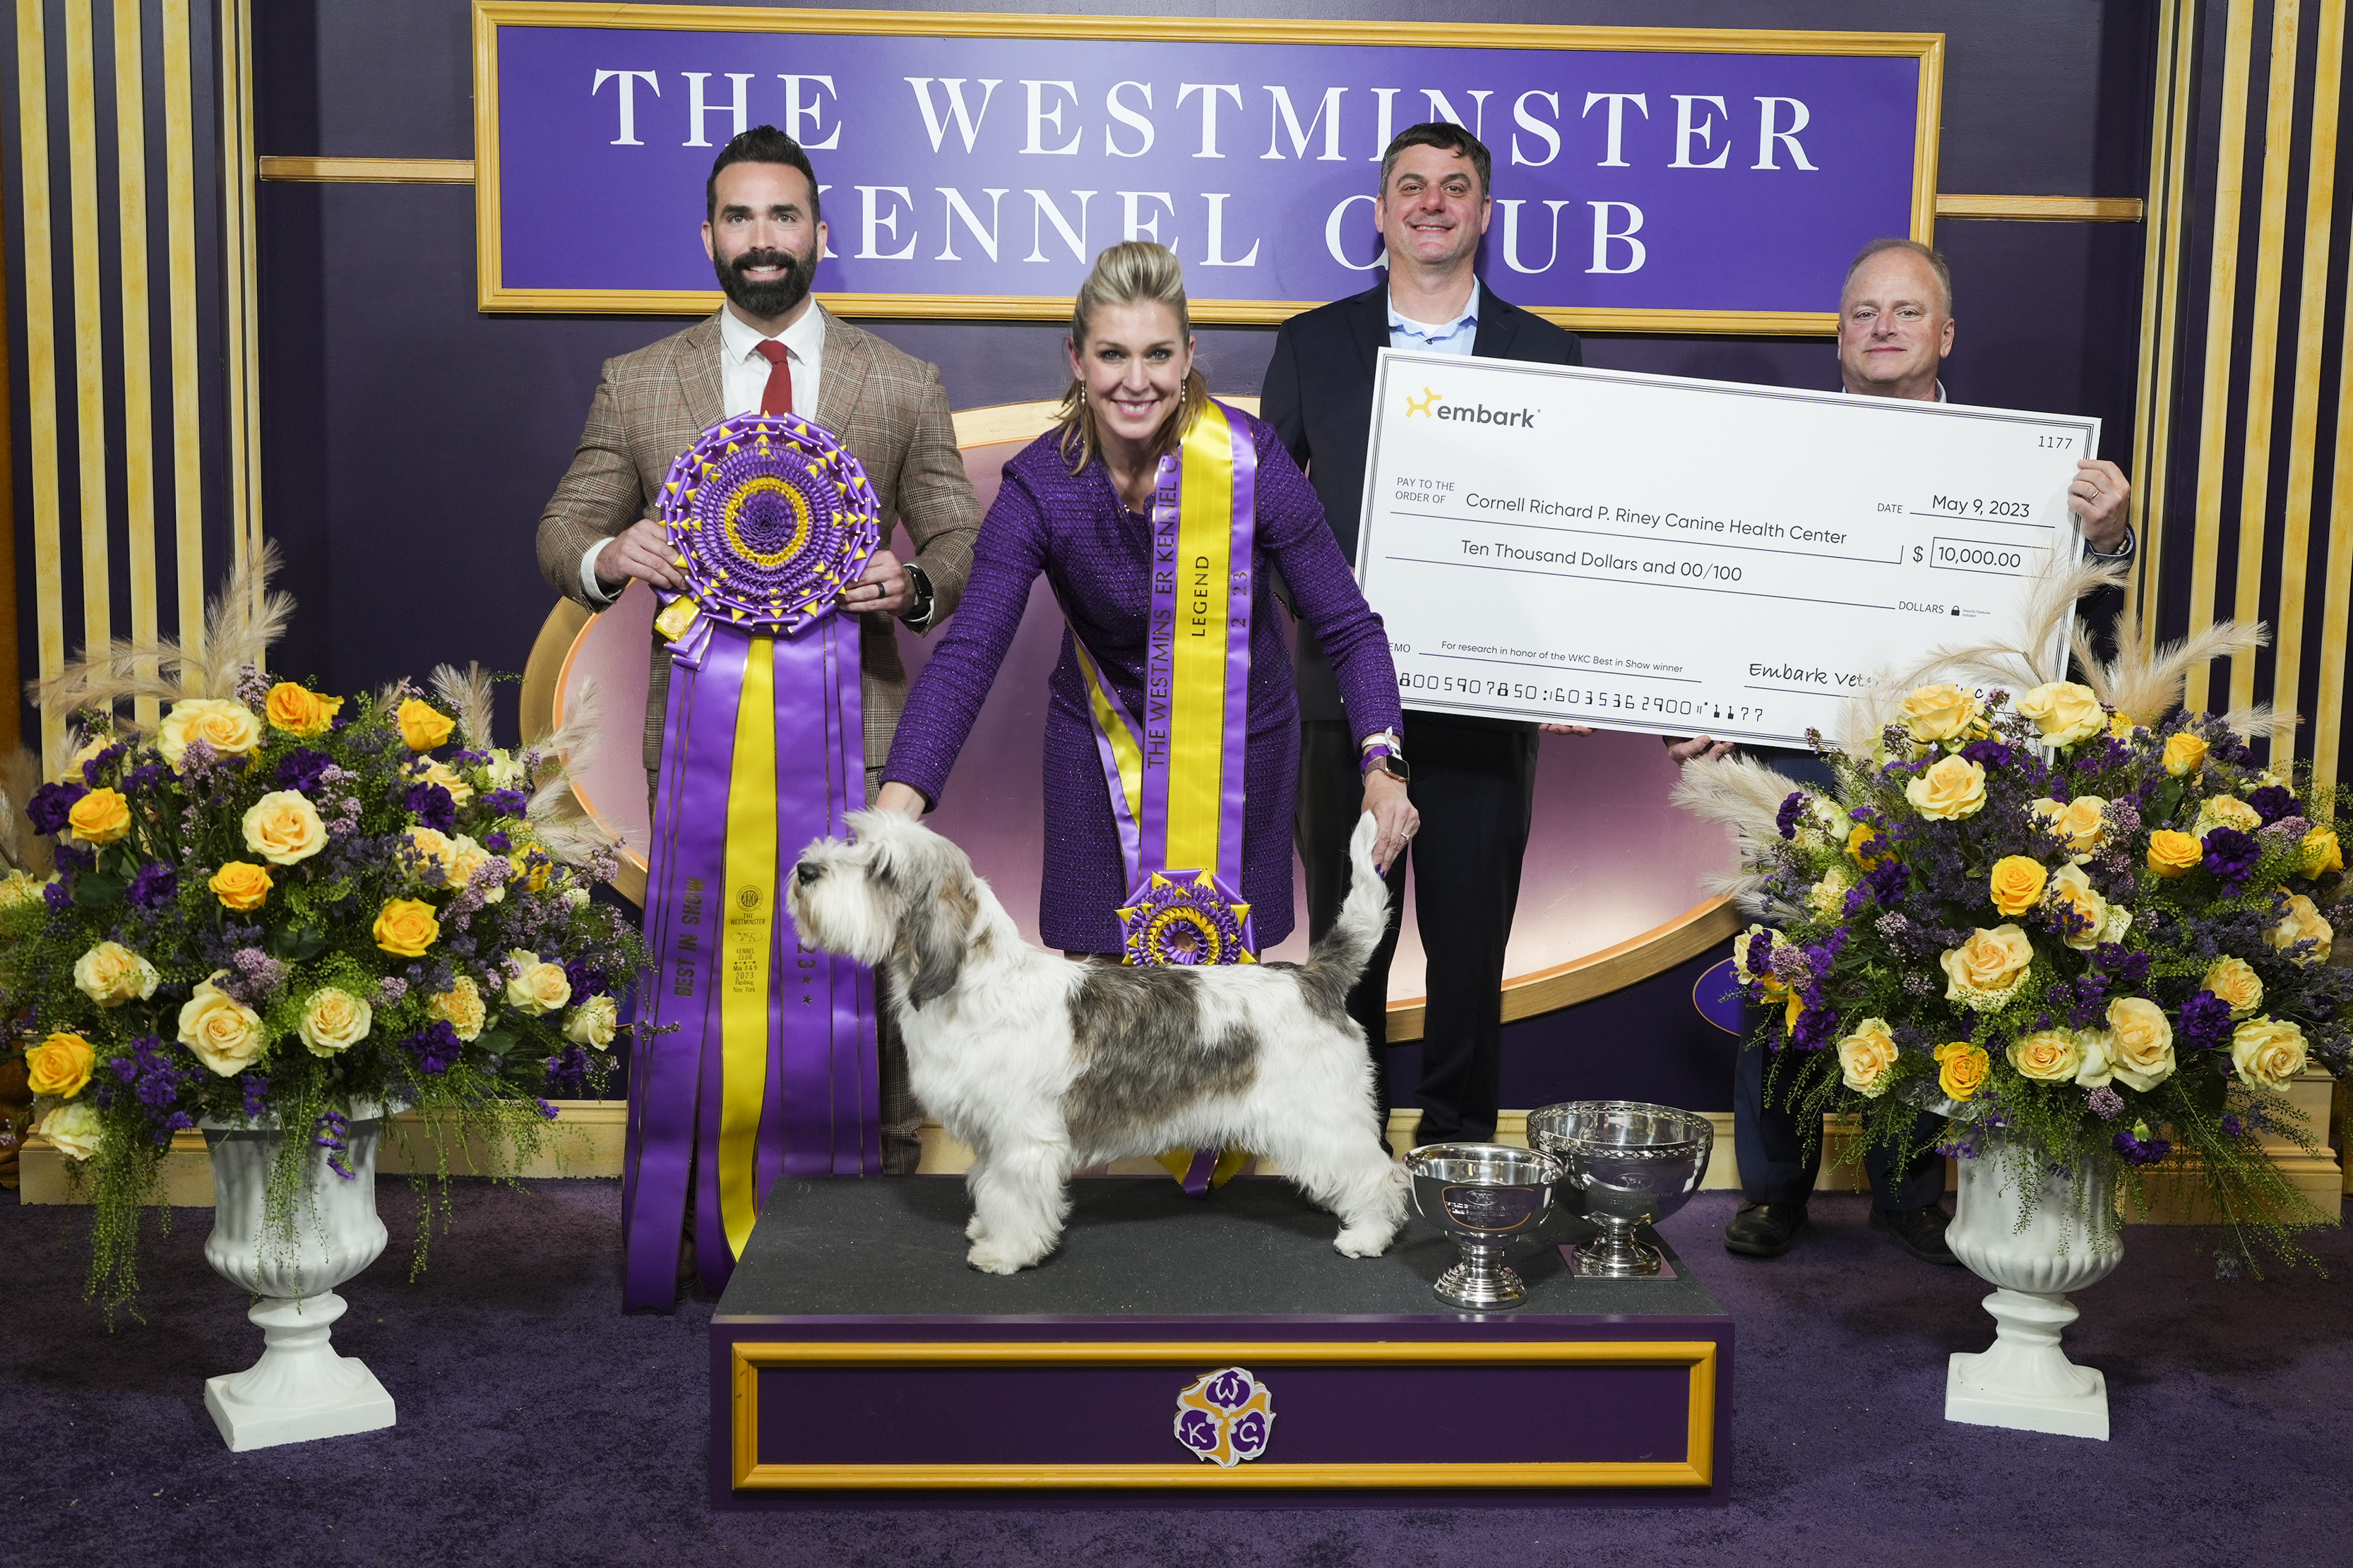 Two men in suits hold a giant check behind a woman and a dog who won giant purple and yellow ribbons